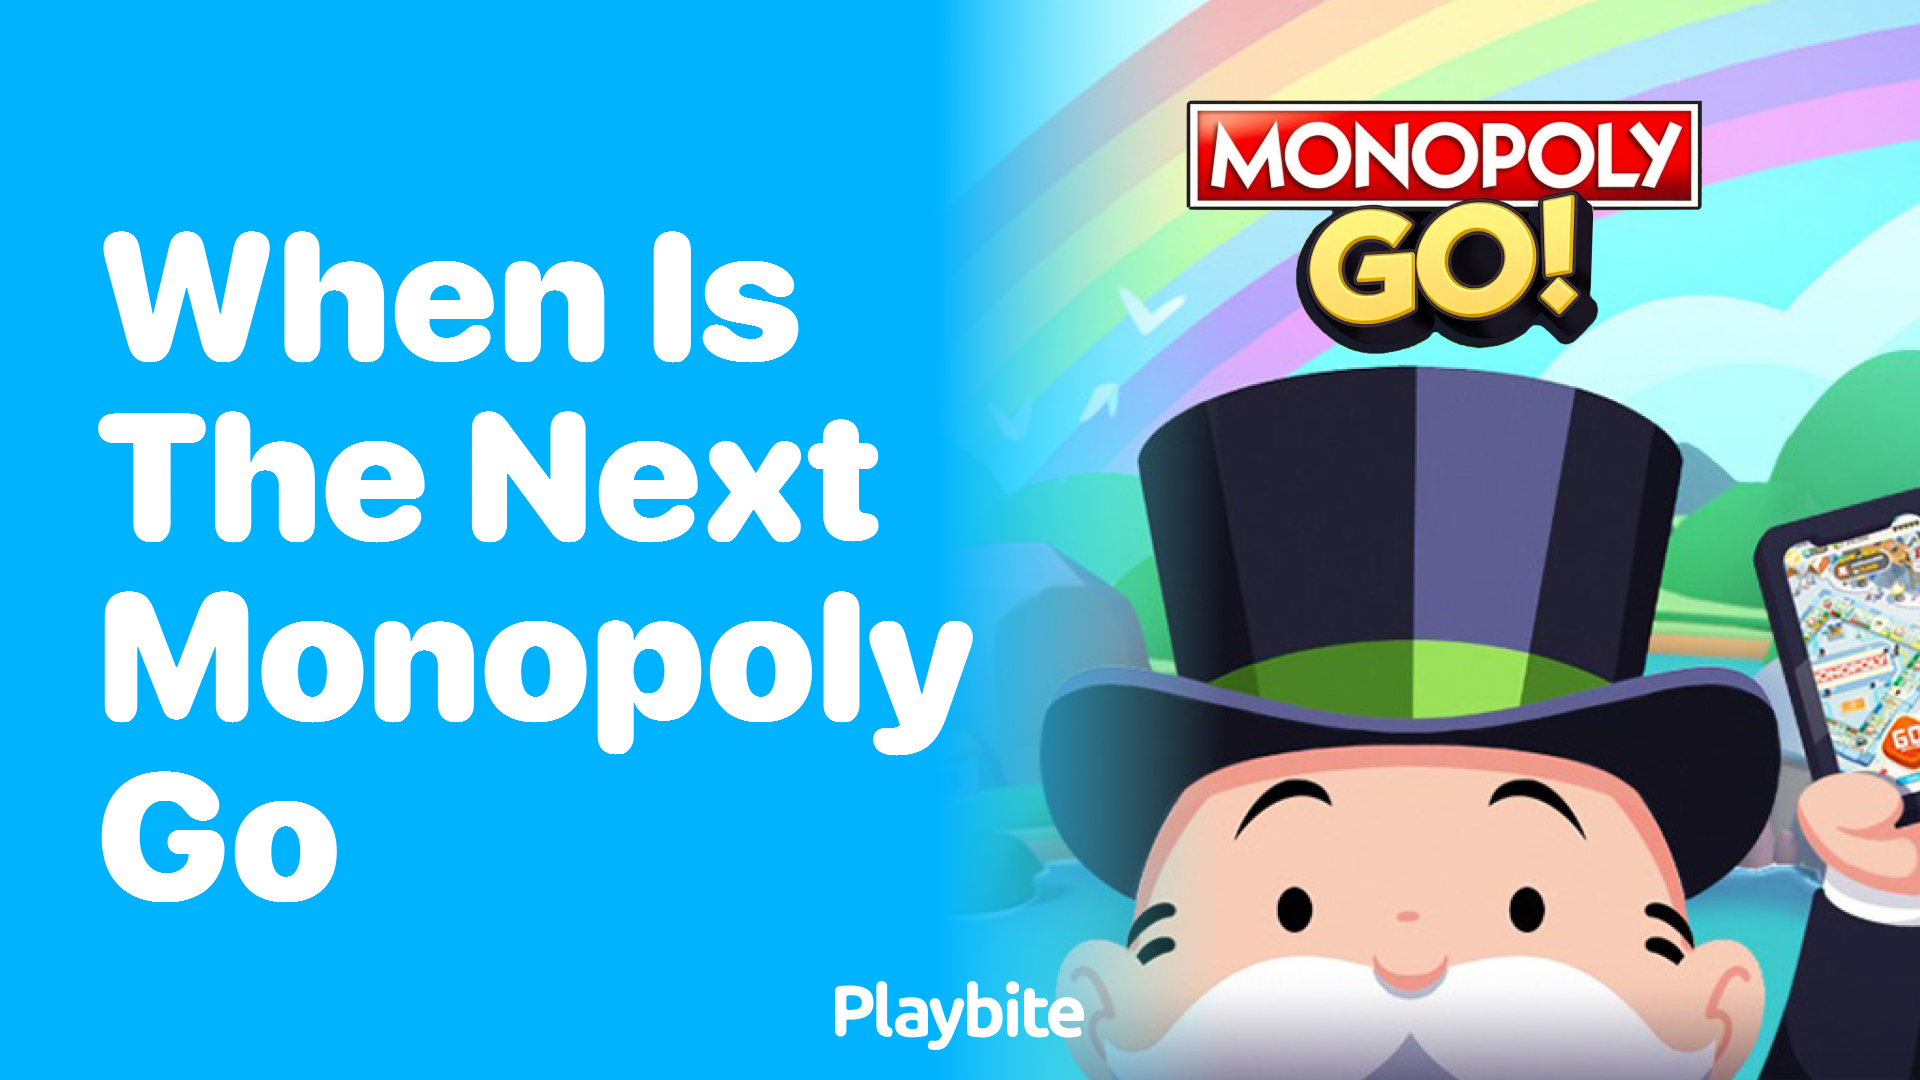 When Is the Next Monopoly Go Rolling Out?